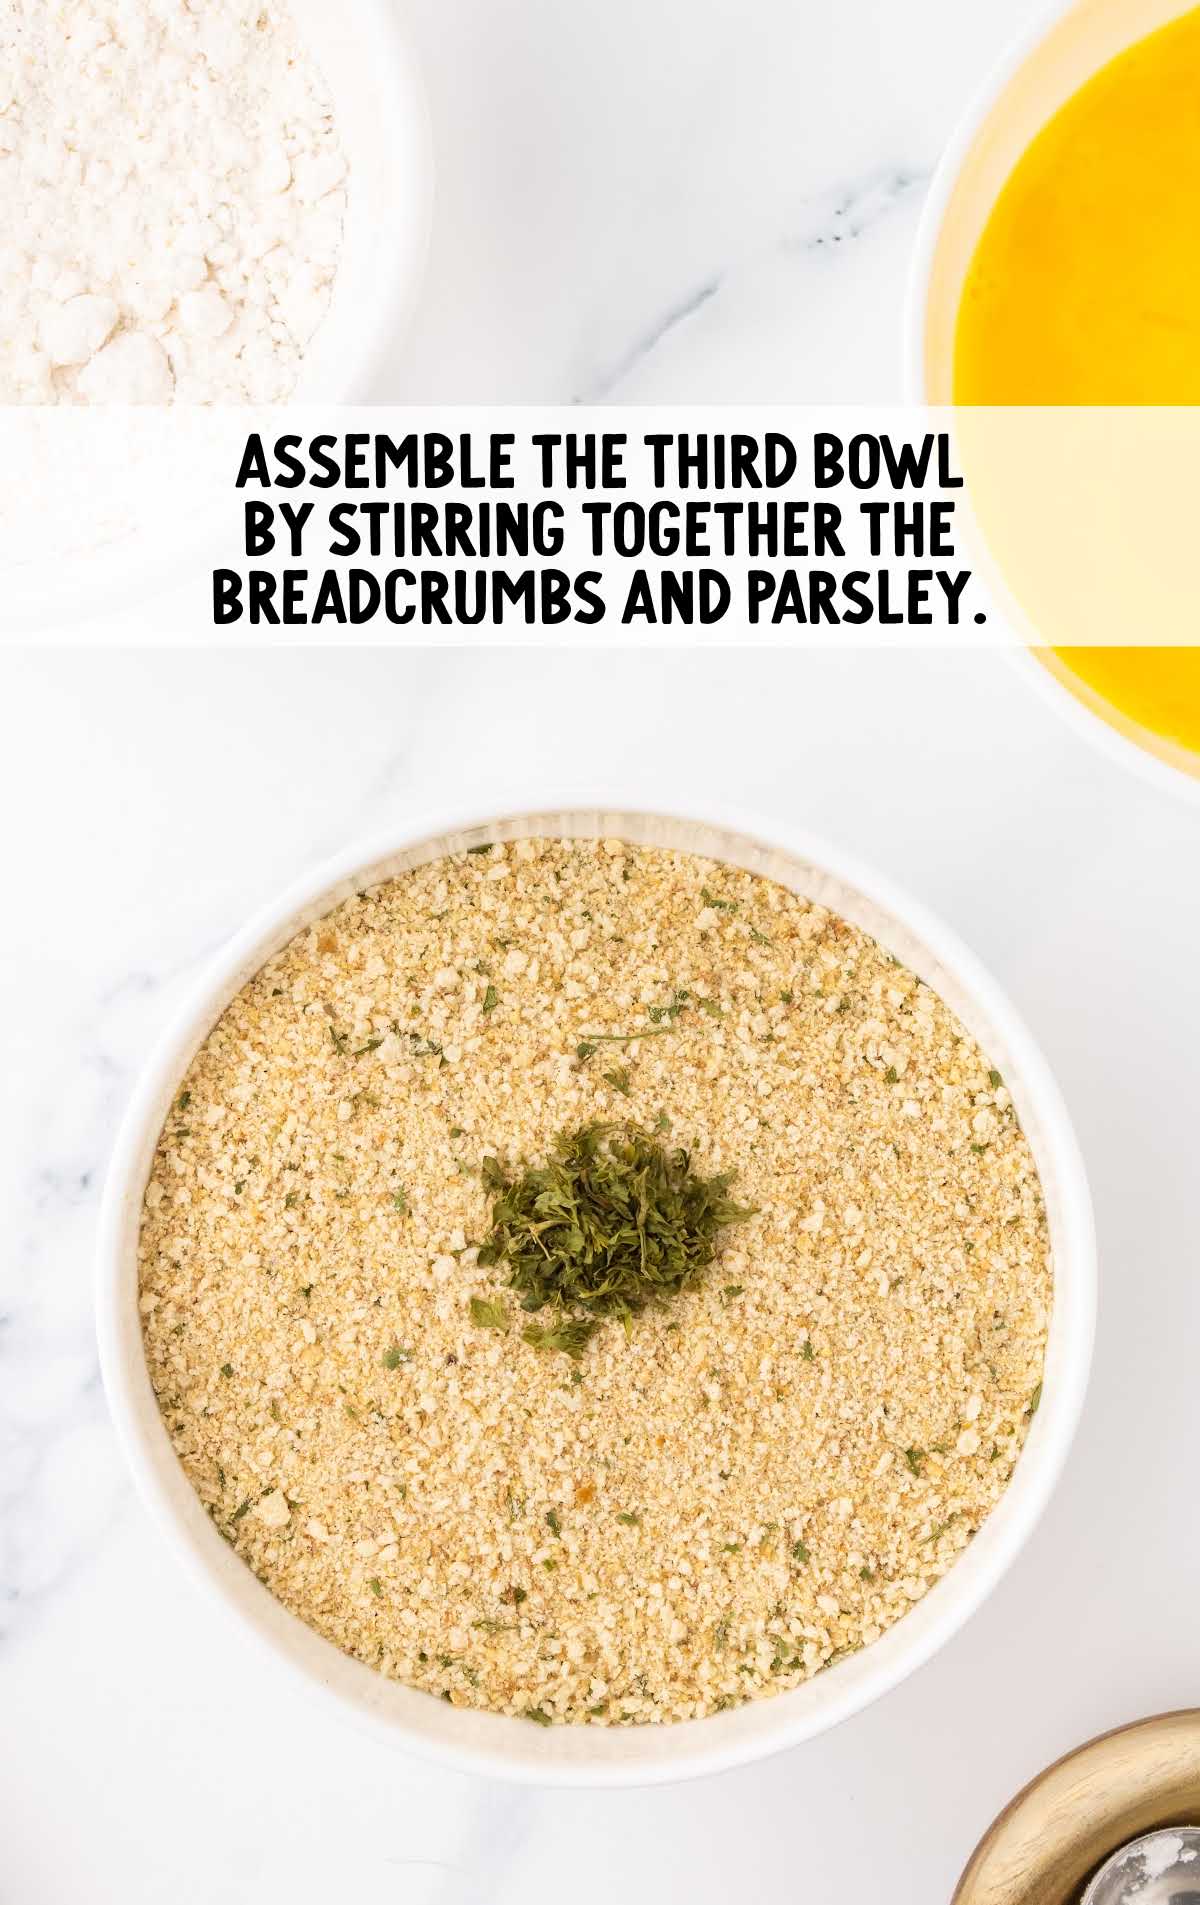 breadcrumbs and parsley combined in the third bowl